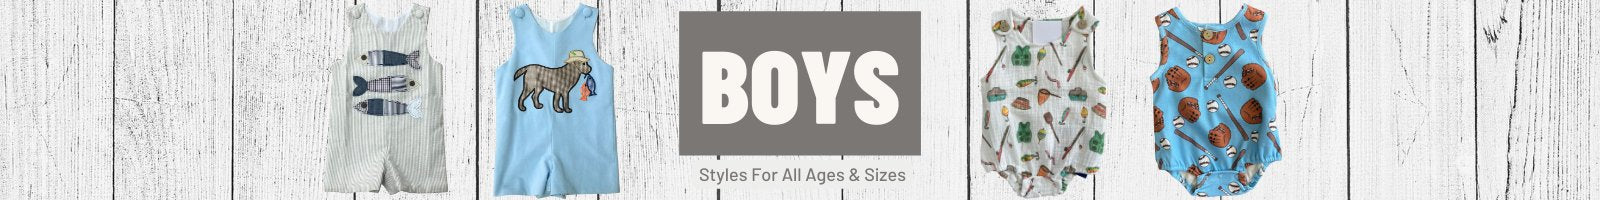 Boys Banner For Boys Collection, Styles For All Ages & Sizes